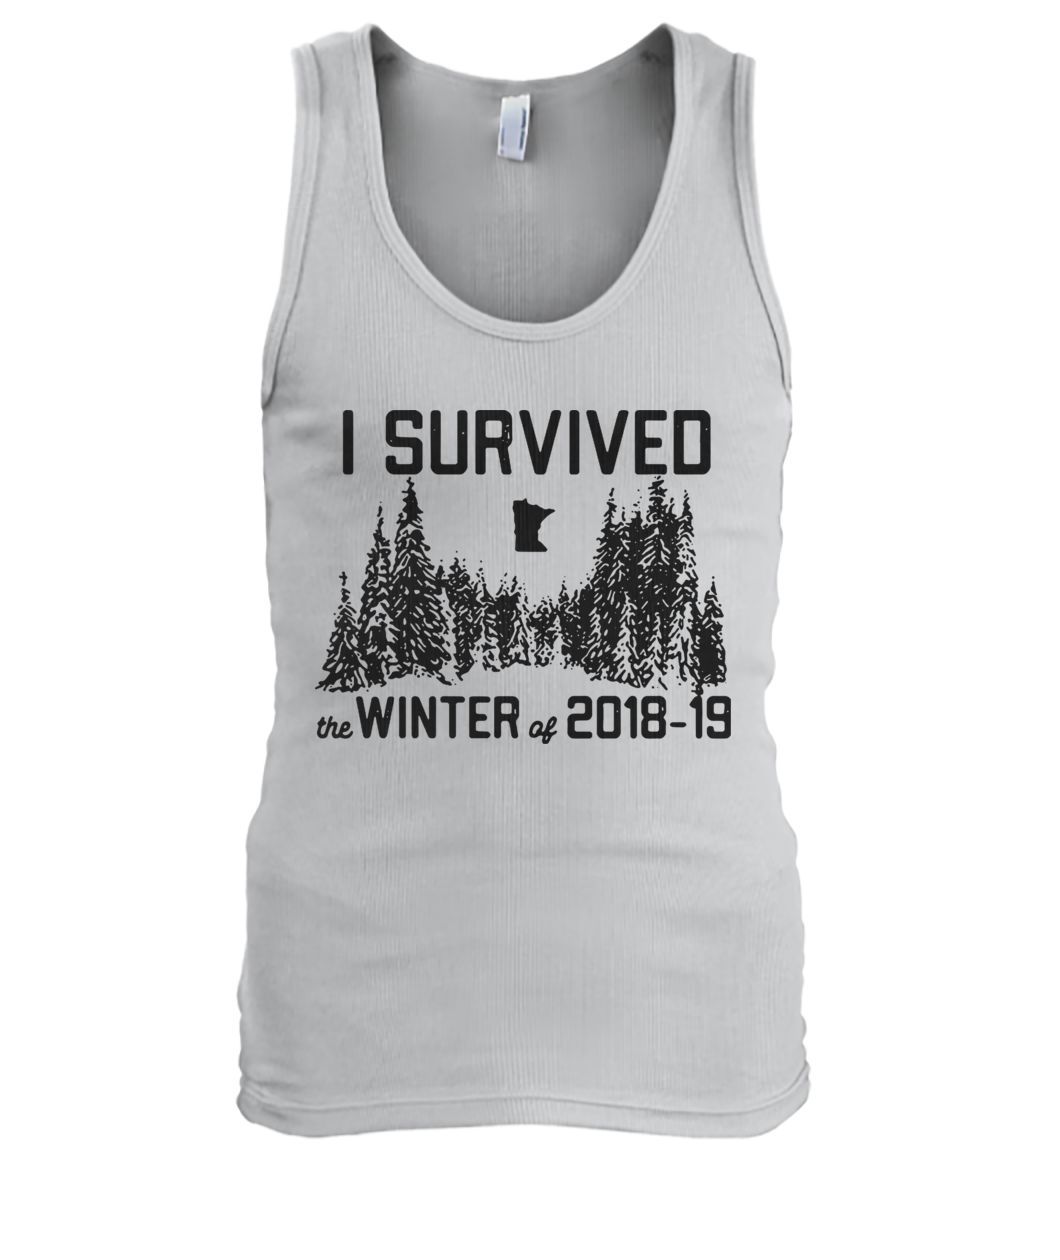 I survived the winter of 2018 19 men's tank top